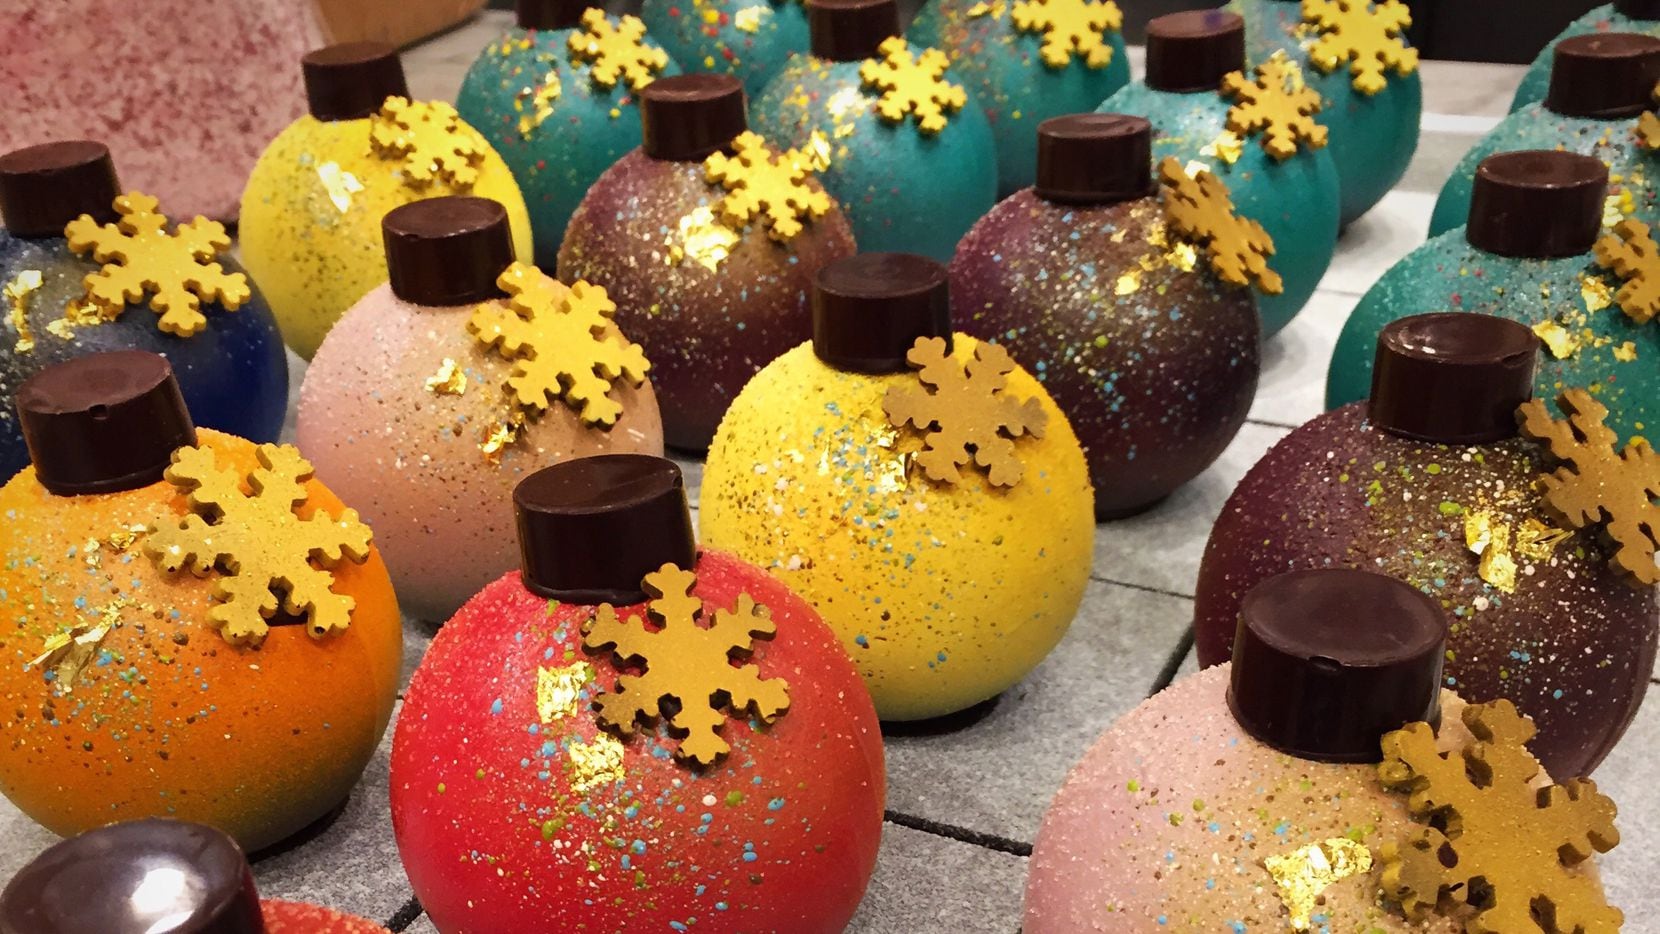 Kate Weiser sells hand-painted chocolate ornaments that are about the size of your fist.